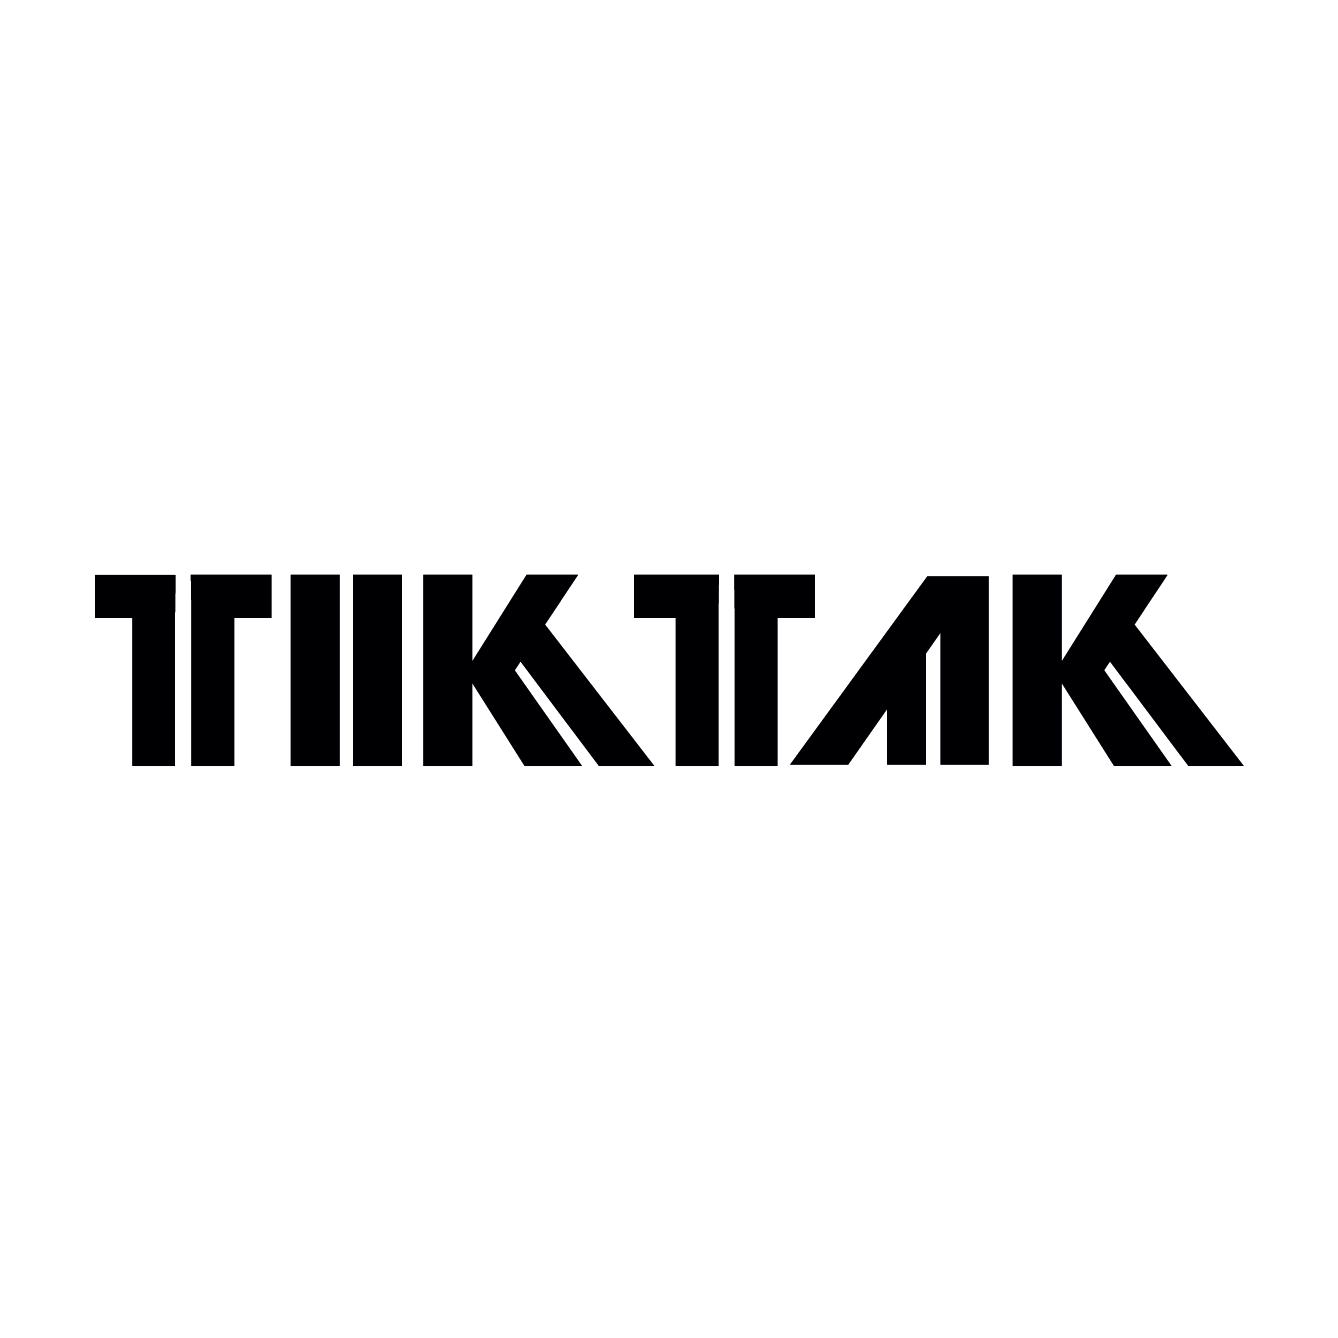 TIKTAK New Year's Eve Amsterdam - Festival Lineup, Dates and Location ...